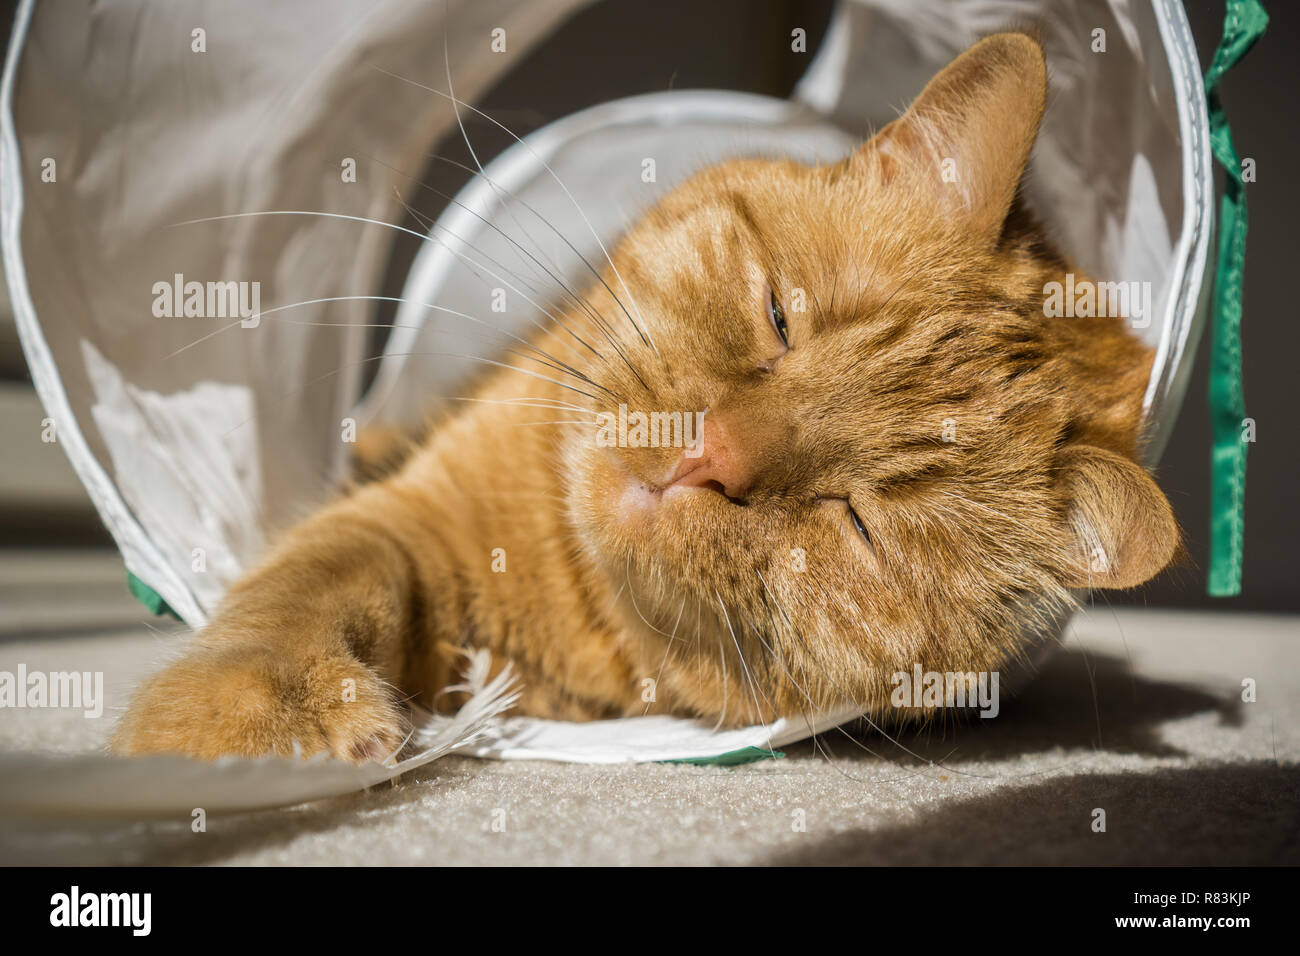 Large orange cat sleeping in a cat tunnel Stock Photo